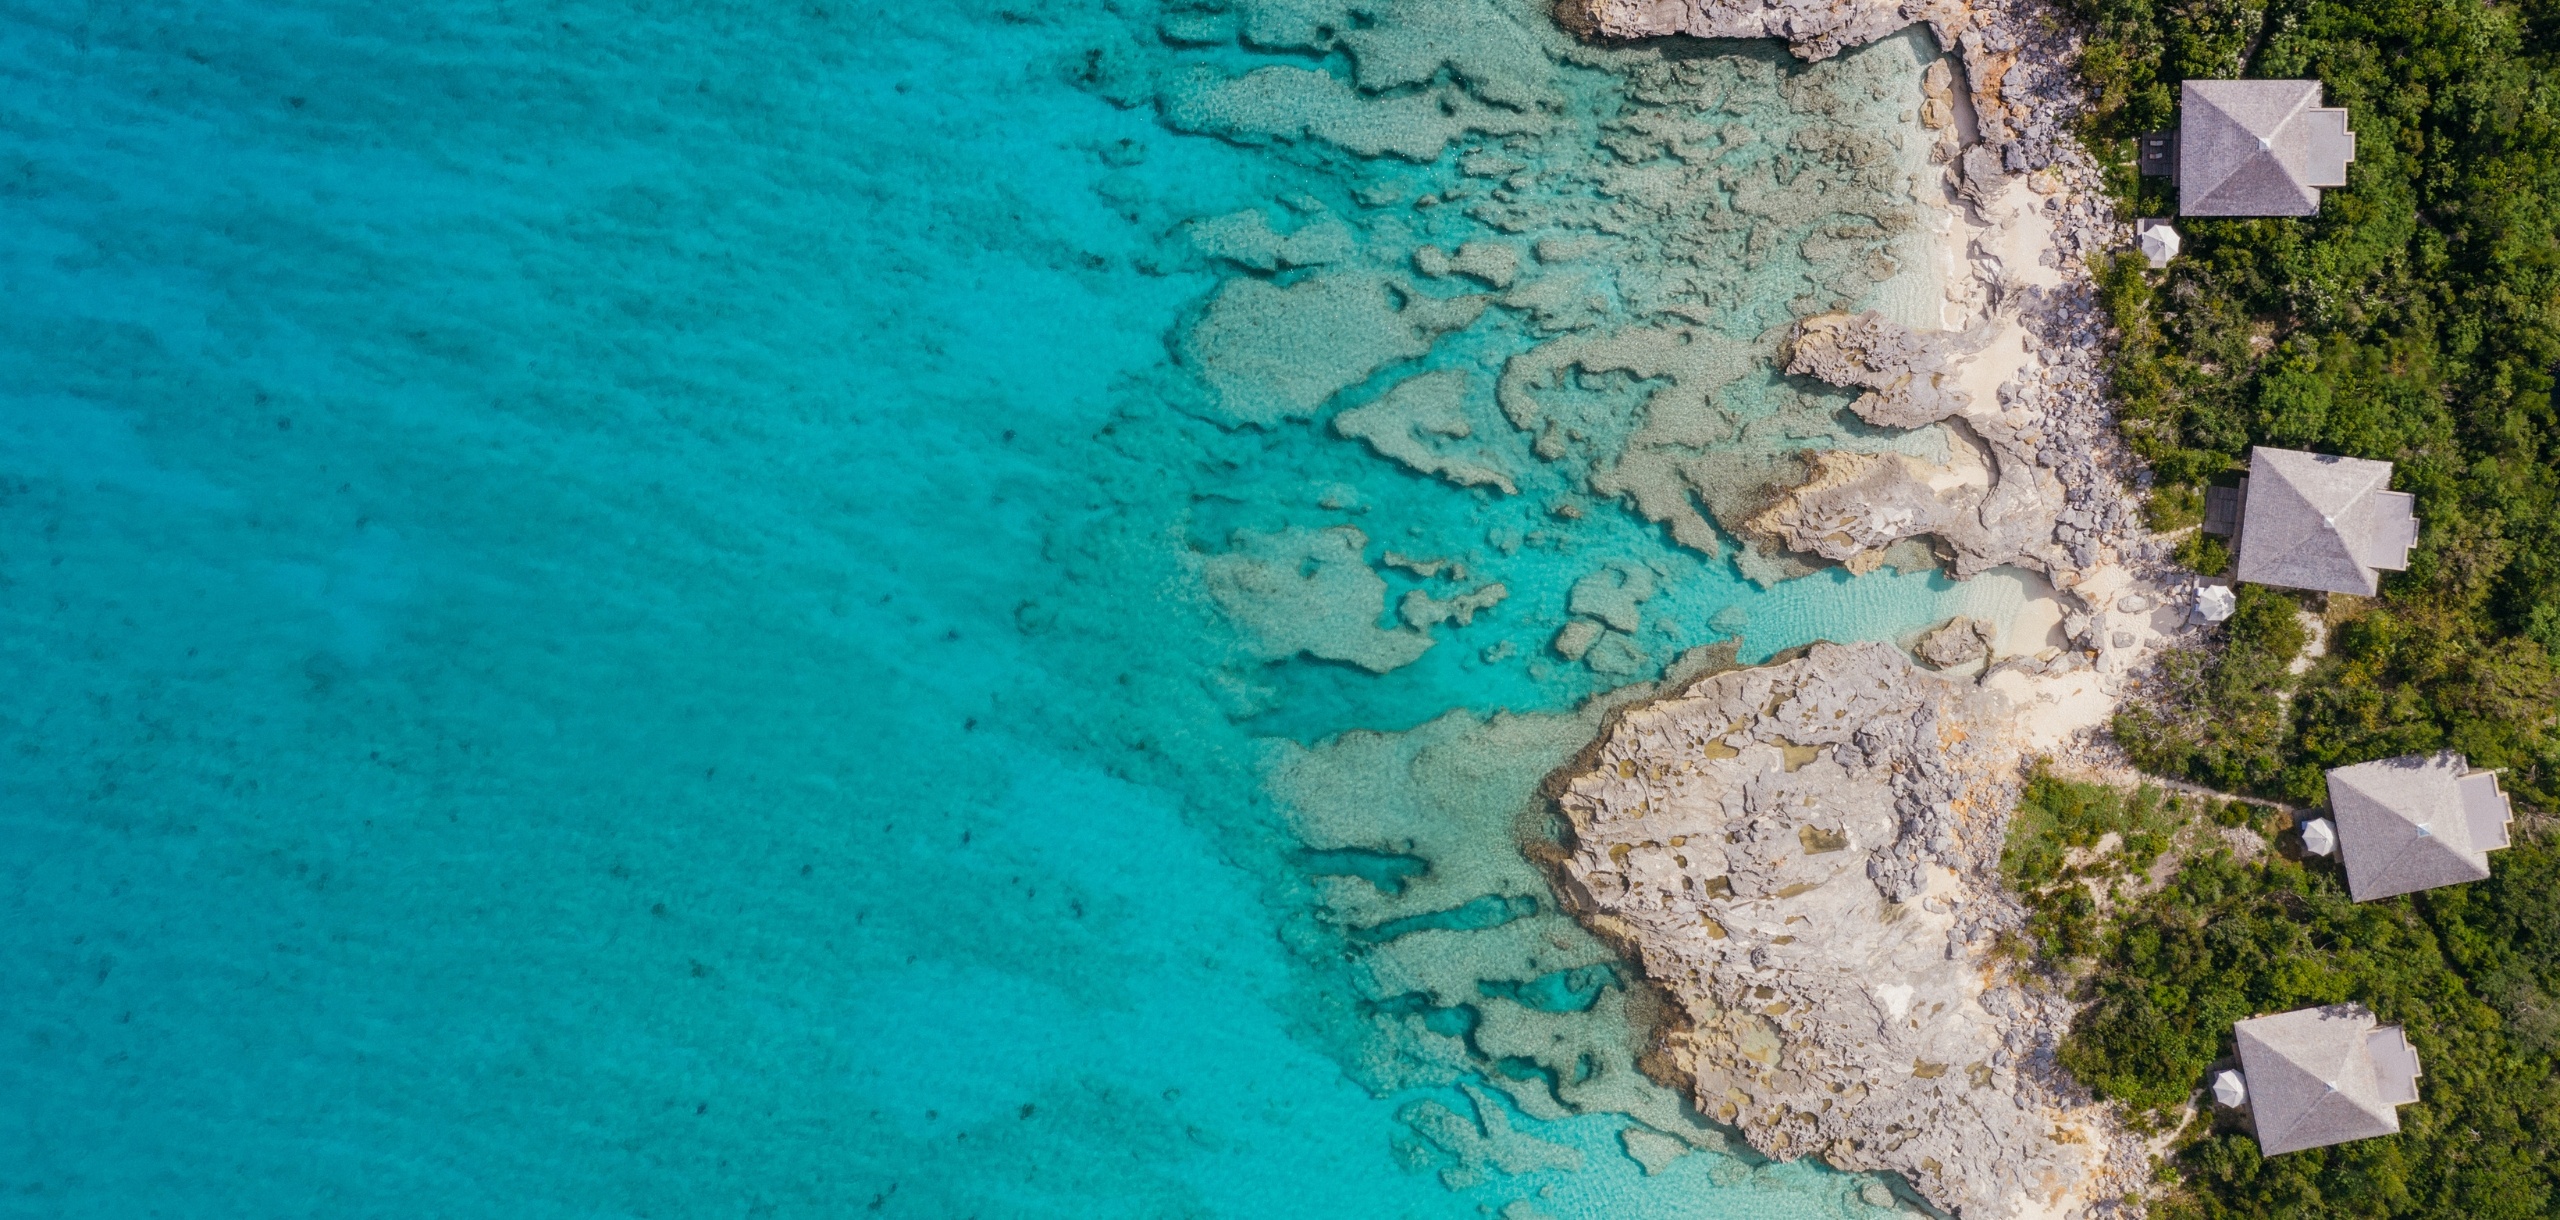 Arial image of Turks and Caicos’ remote northwest coast